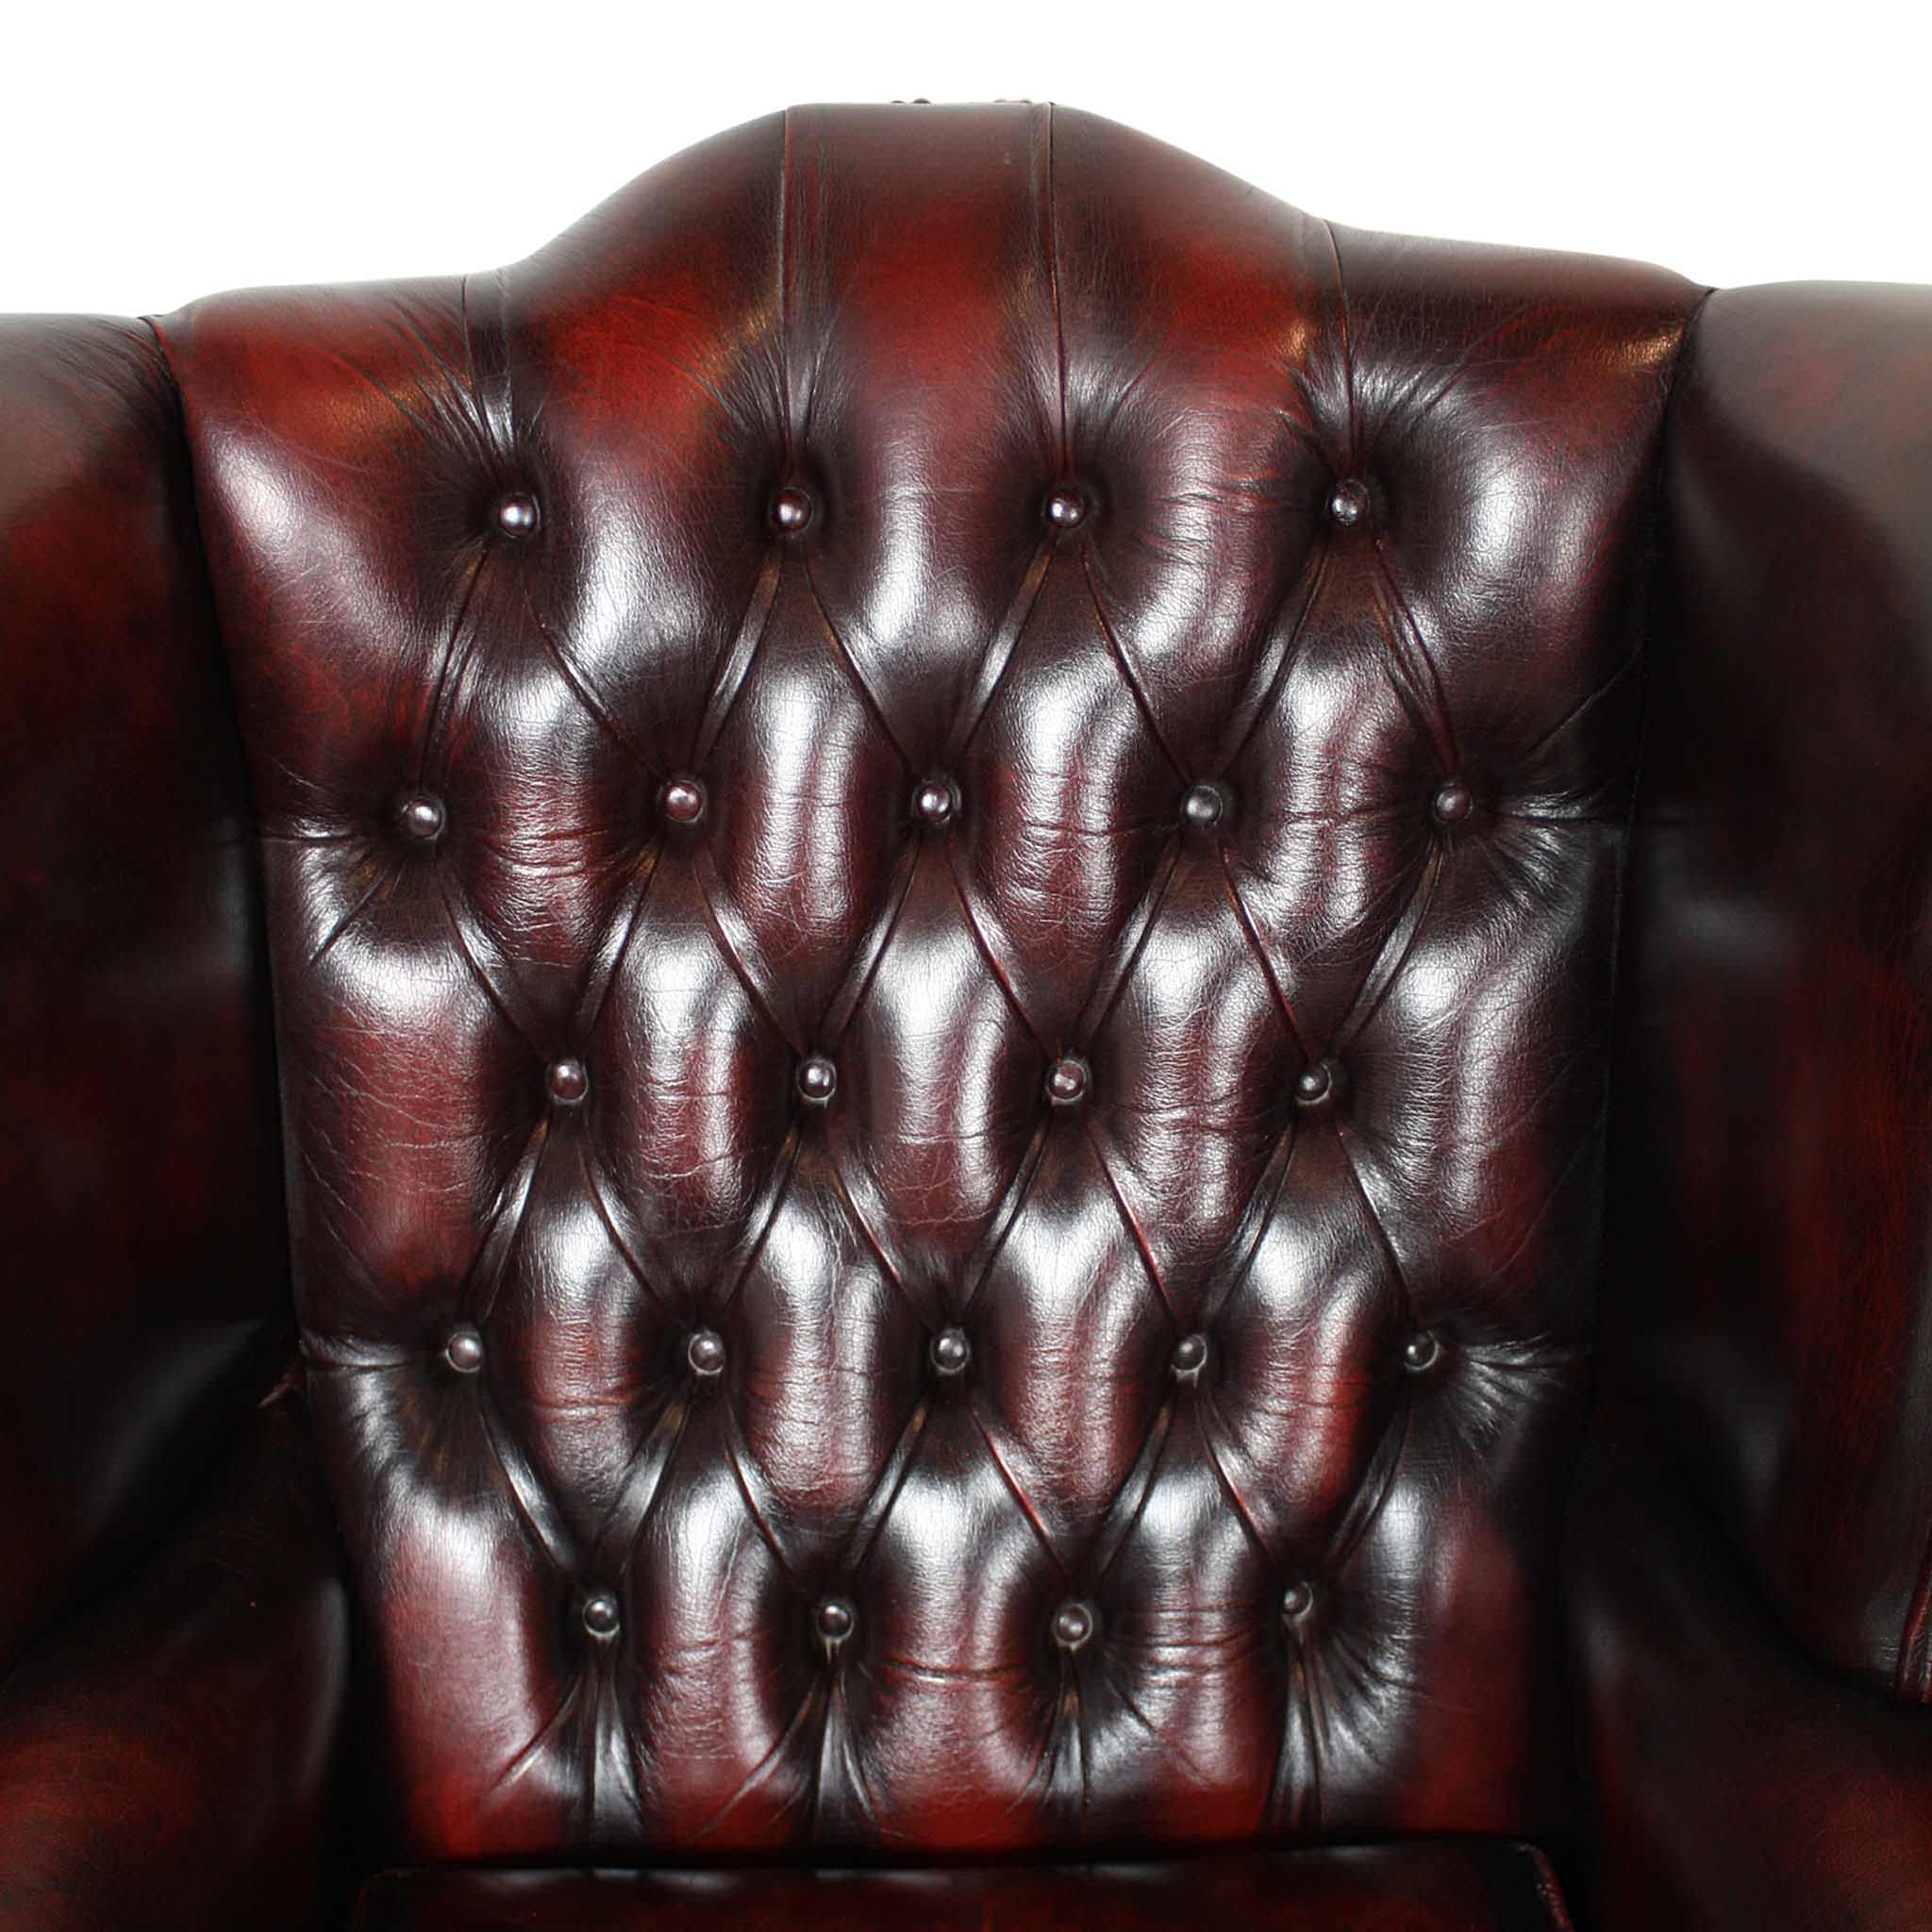 Oxblood Chesterfield English Wingback Leather Chairs/Set of Two